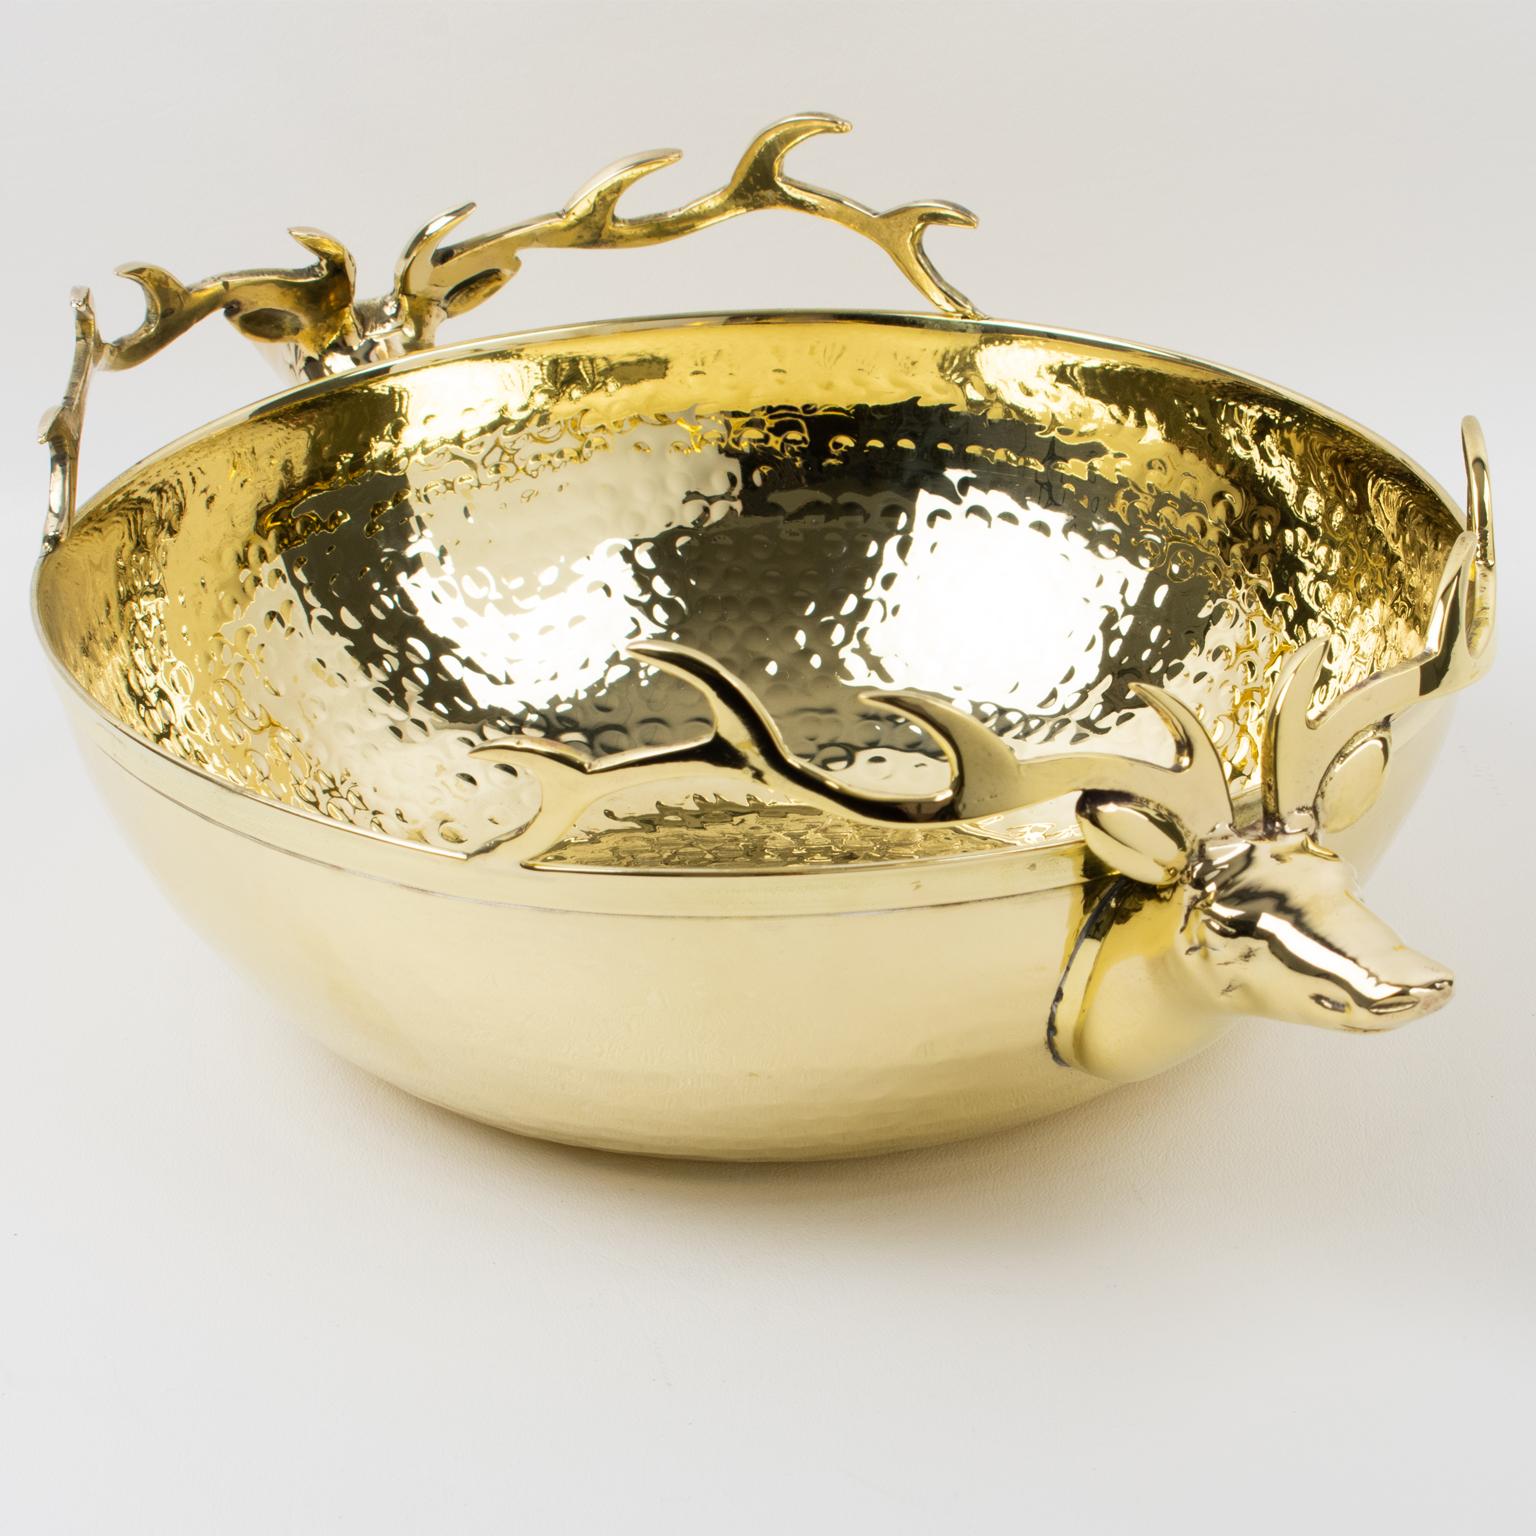 Metal Brass Bowl Decorative Centerpiece with Stag Heads Handles, Italy 1980s For Sale